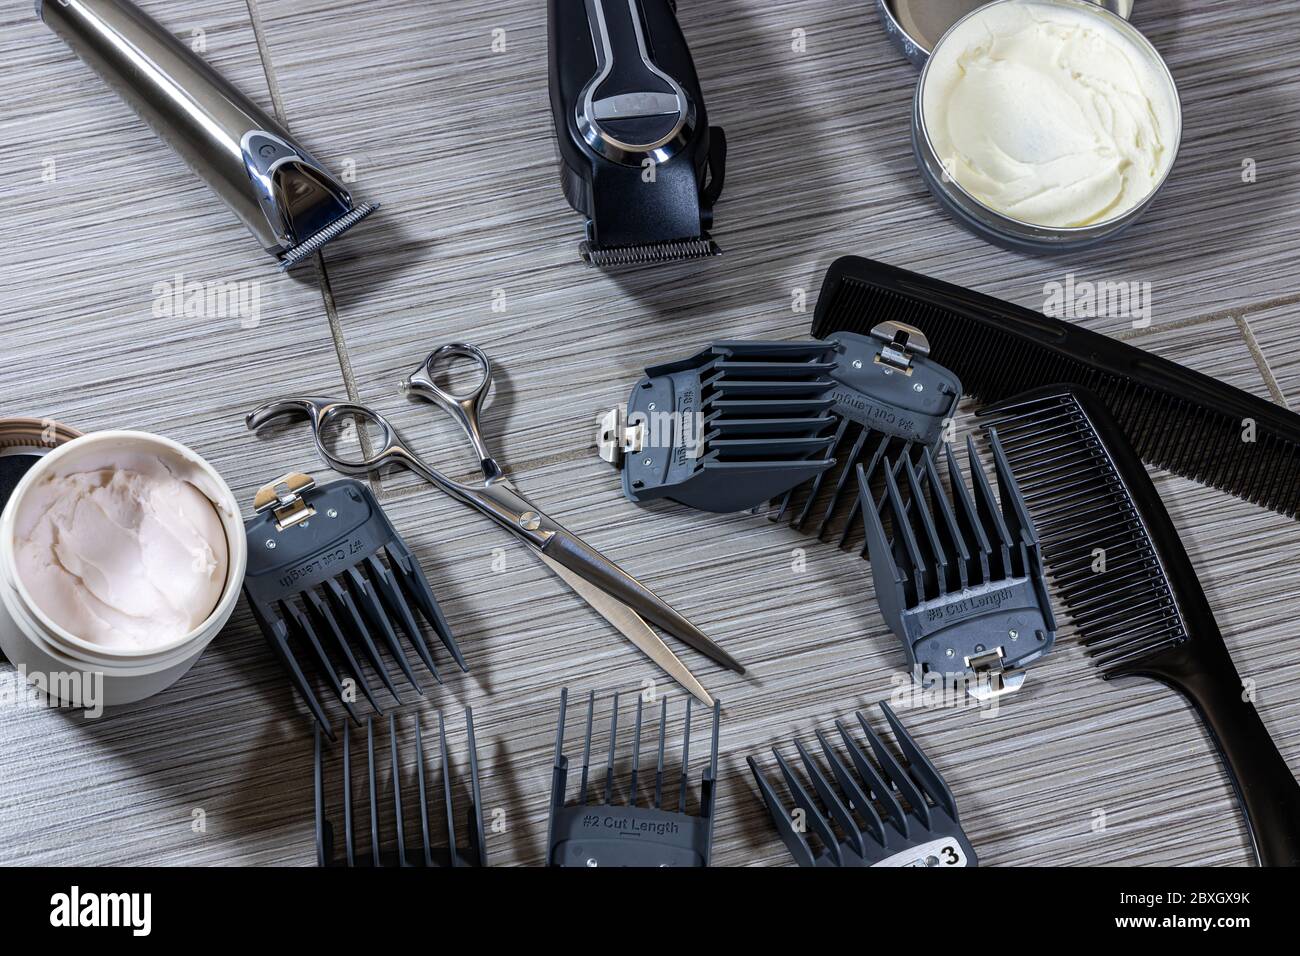 an assortment of tools and equipment used by professional barbers or hair stylists Stock Photo